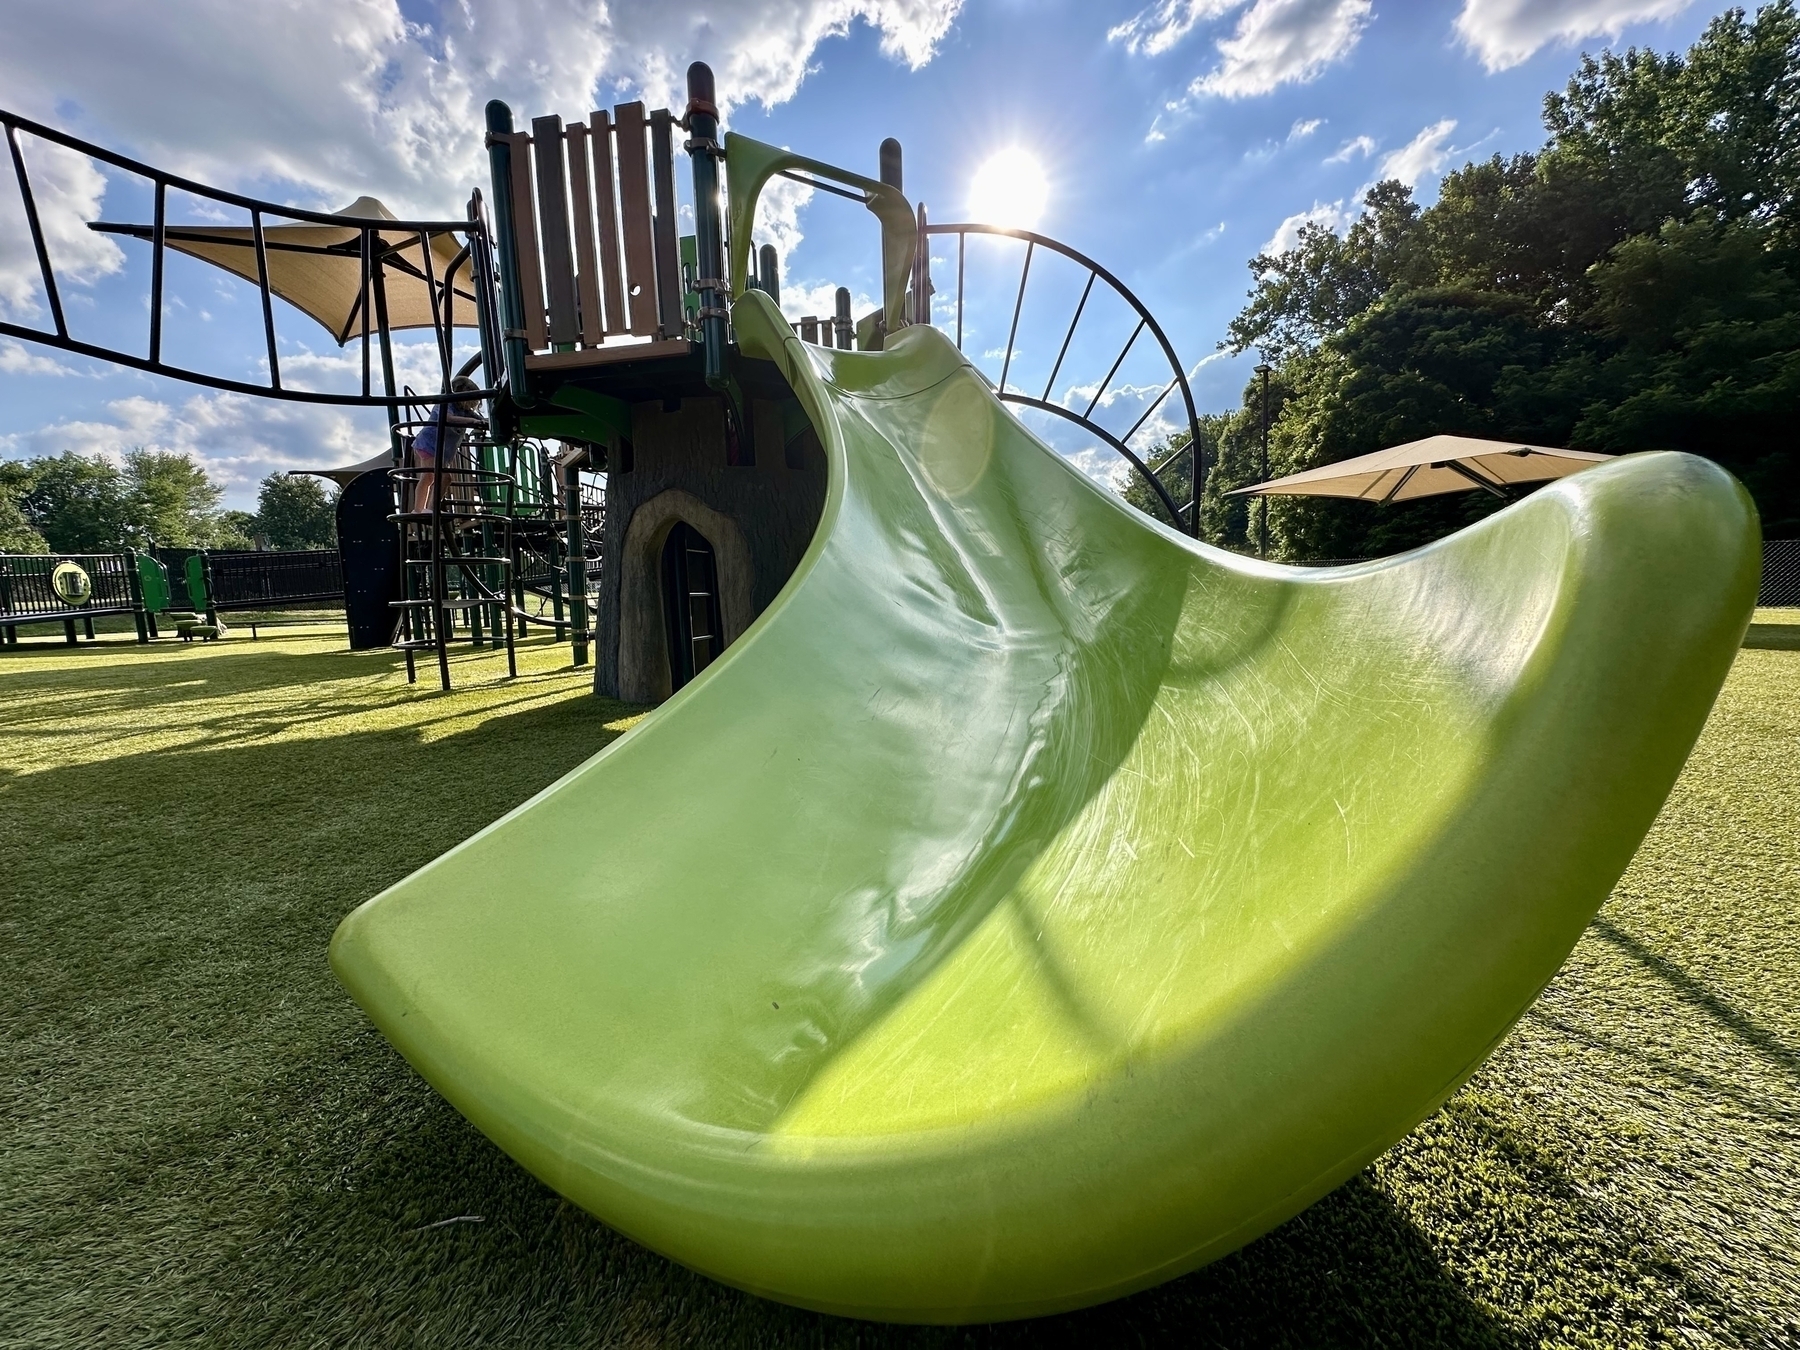 A vibrant green slide is part of a playground under a sunny sky with some clouds.